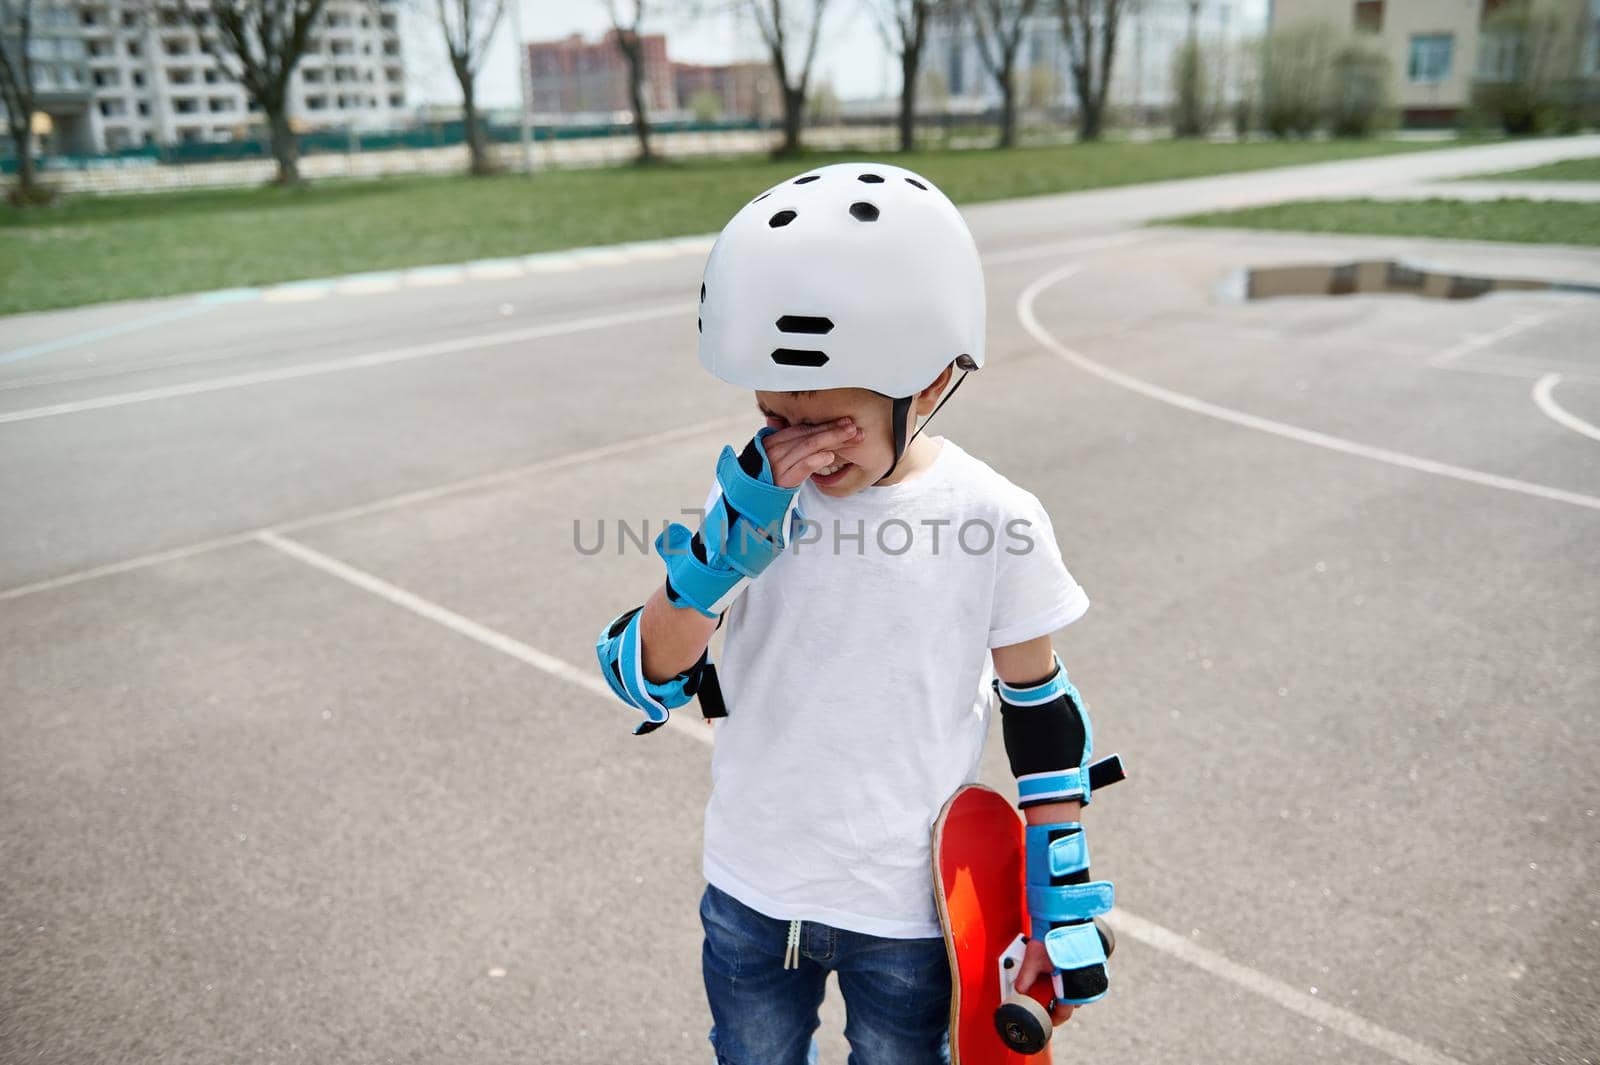 Upset boy skateboarder in protective gear frustratedly wipes tears from his eyes and holds a skateboard in one hand while standing on a sports playground against the background of buildings